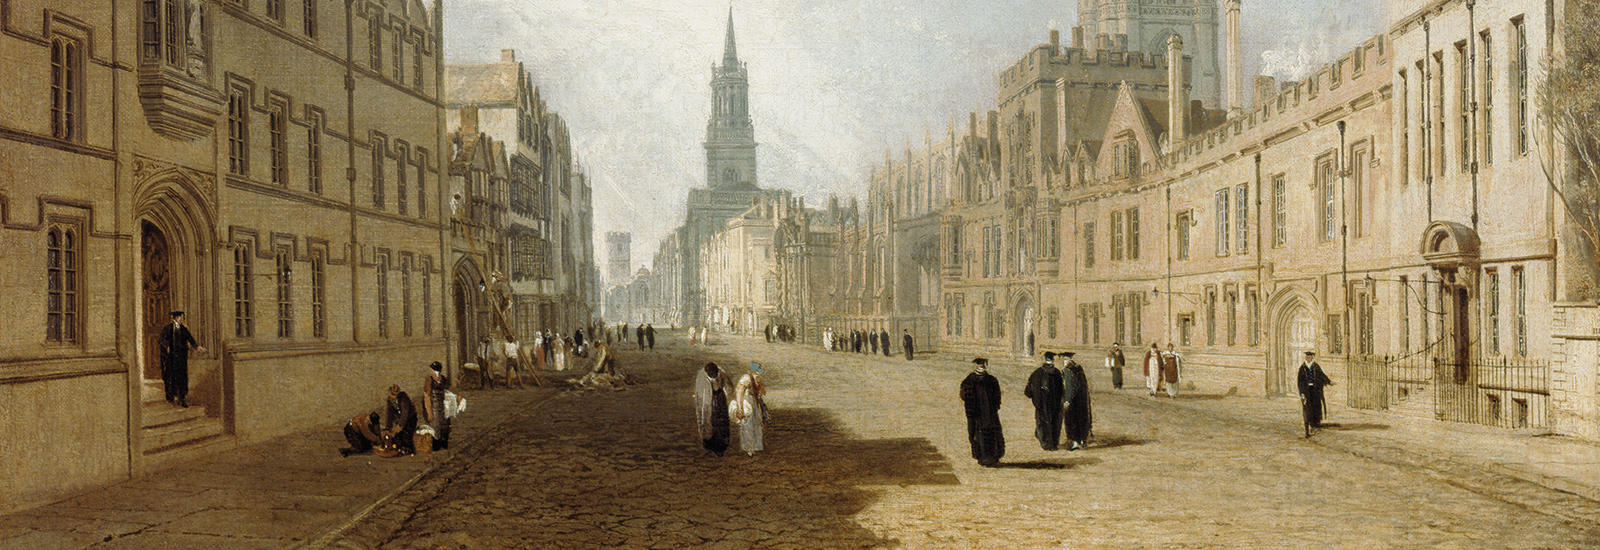 Oxford - how it changed during the English Civil War